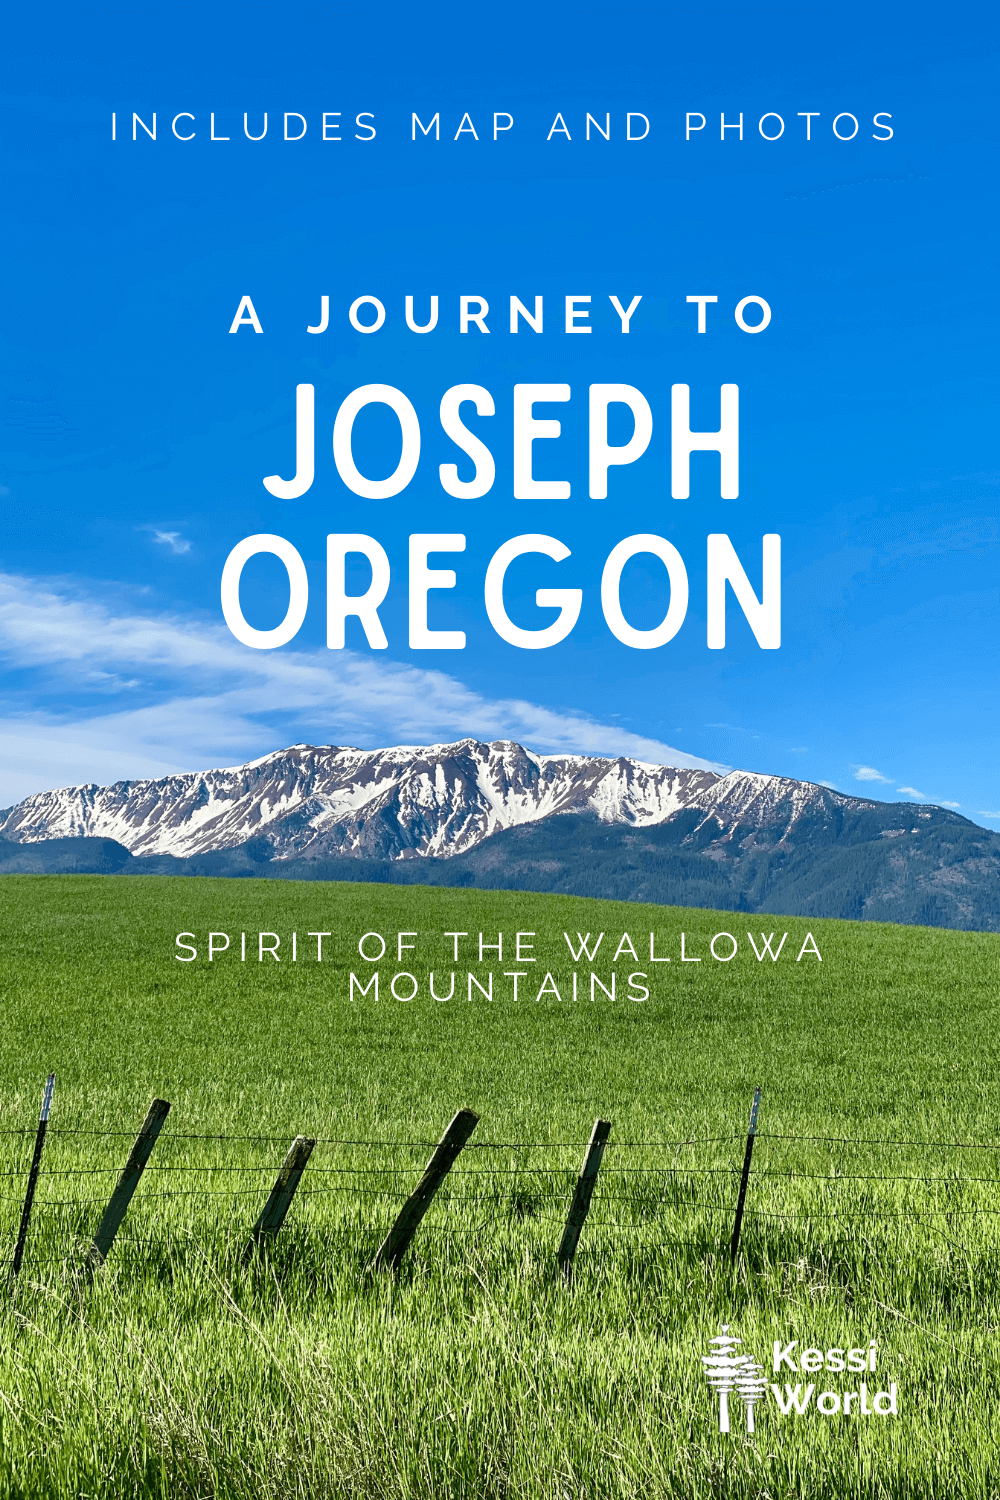 A Pinterest Pin highlighting the article about Journey to Joseph, Oregon, Spirit of the Wallowas. This shot has bright green grass with a fence running across it below the towering snow-capped mountains above.